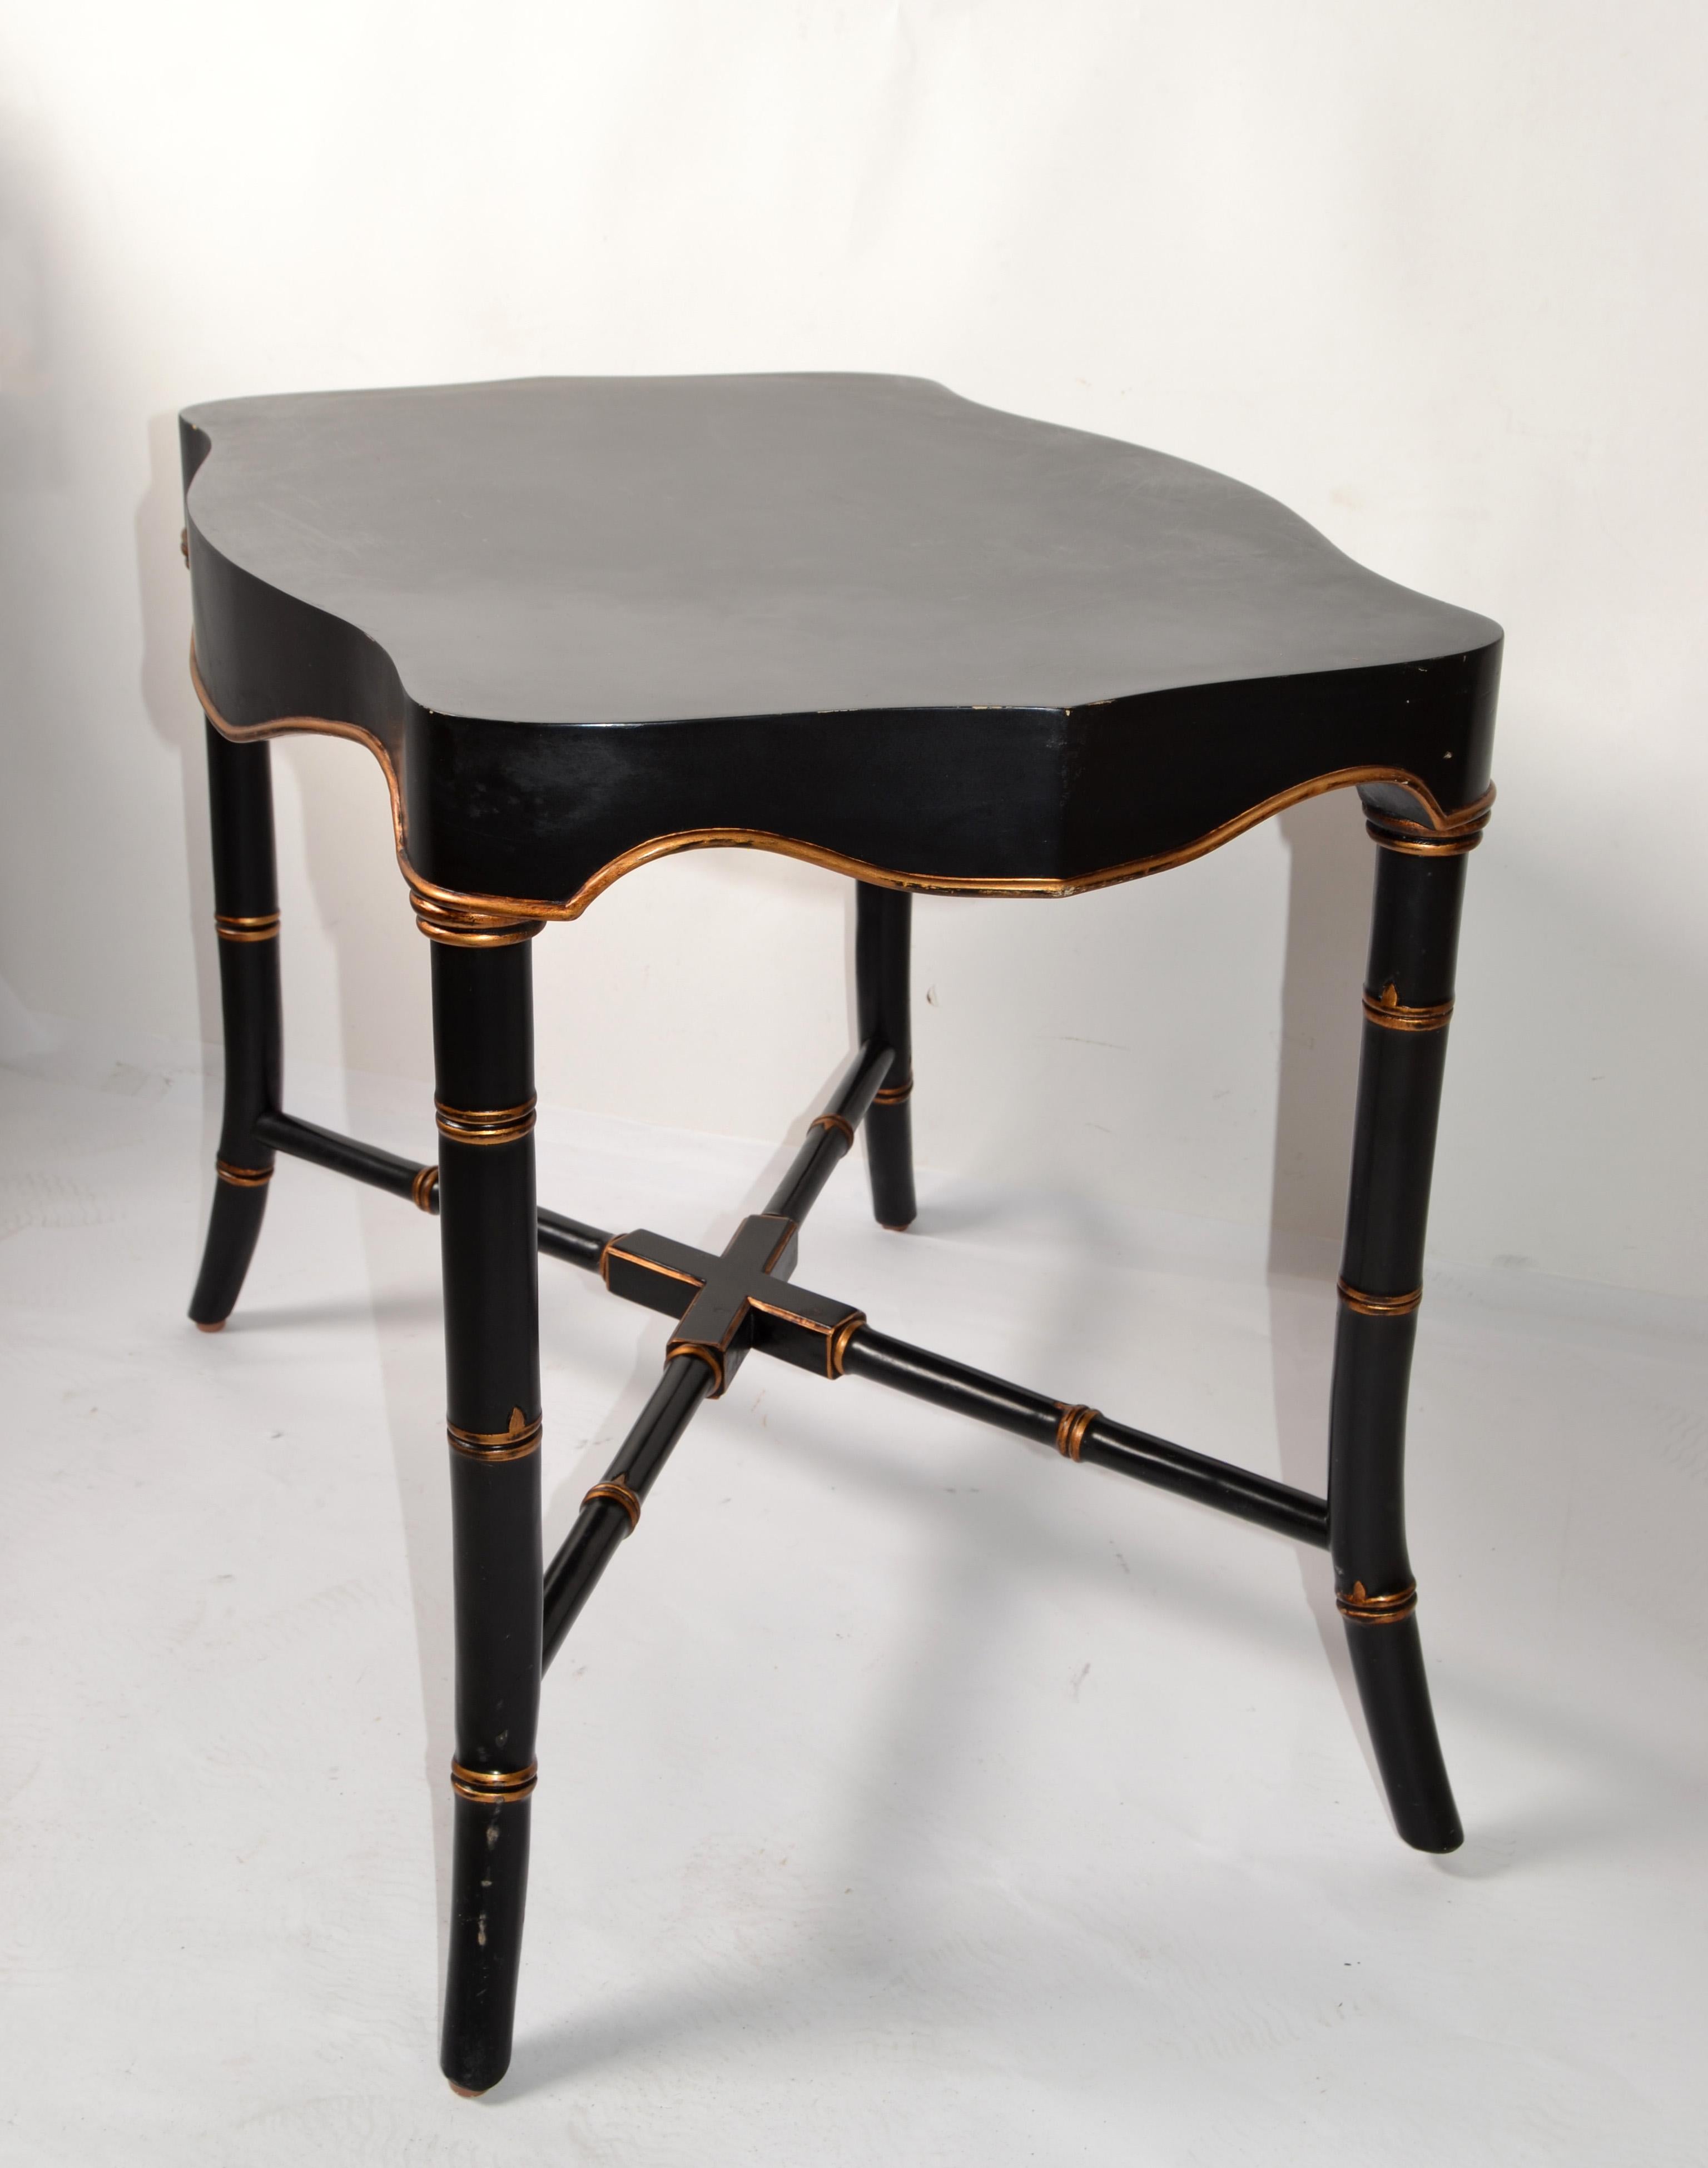 Victorian Mid-20th Century Black Gold Finish Accent Table Faux Bamboo Cross Base For Sale 1